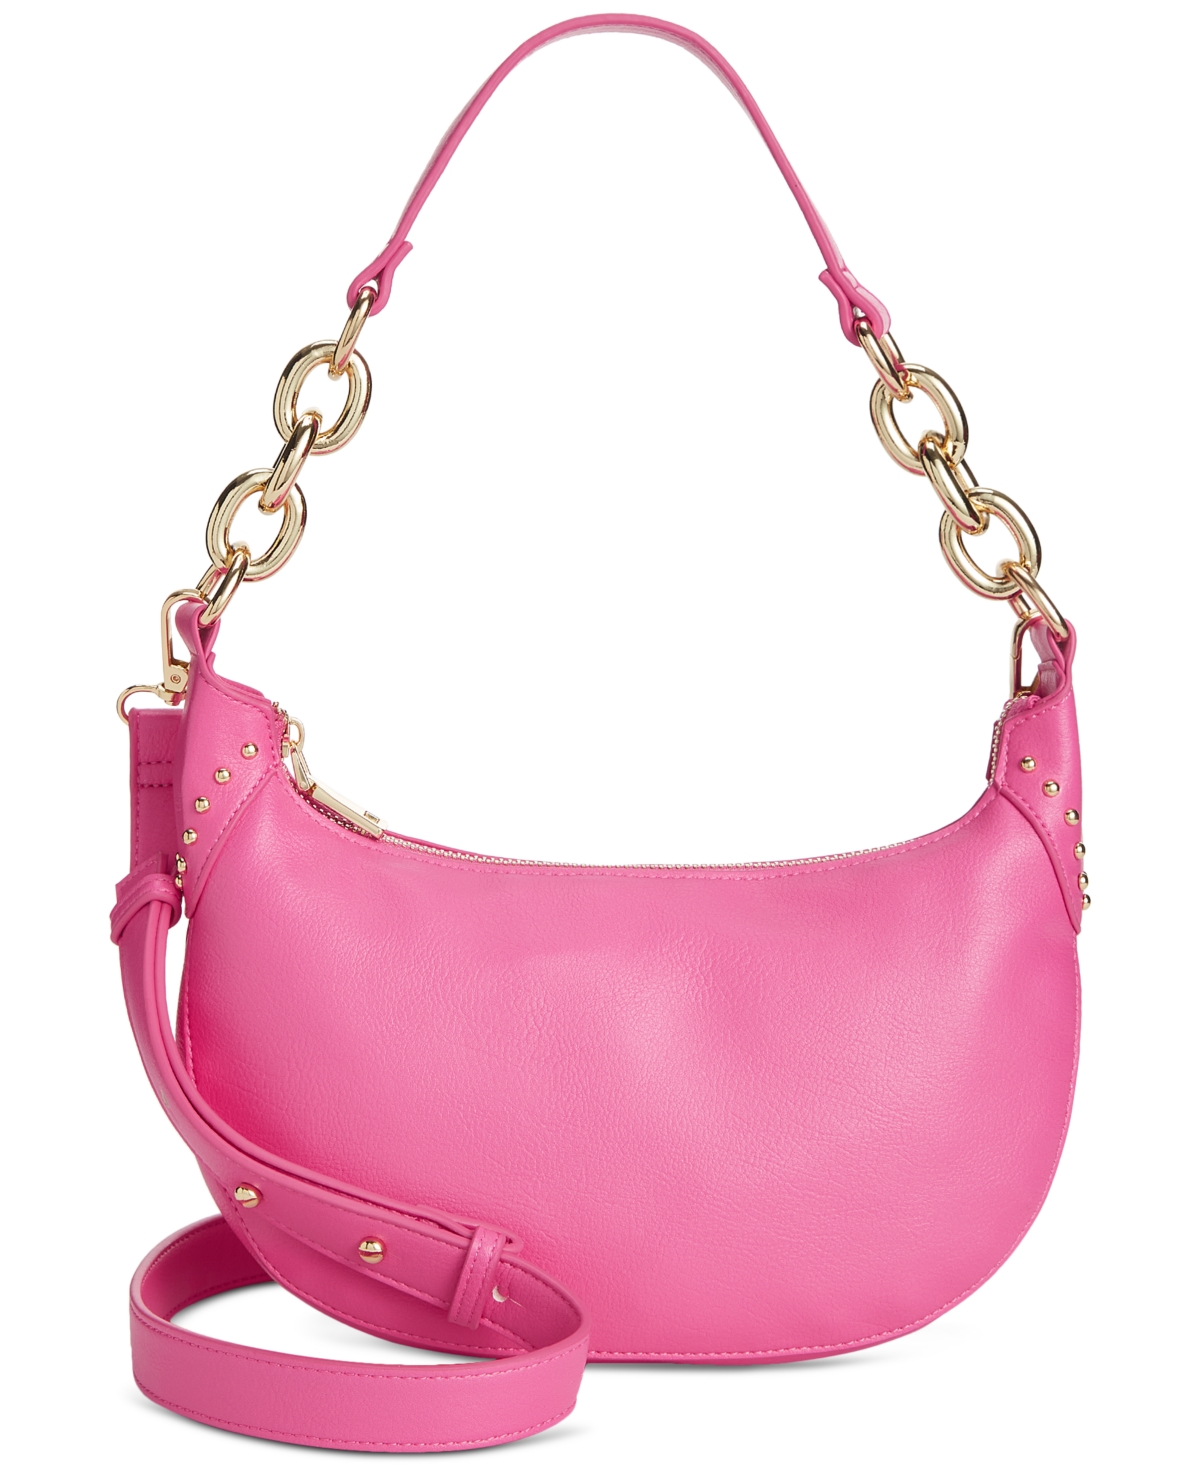 Lielah Small Studded Baguette, Created for Macy's - Pink Glam